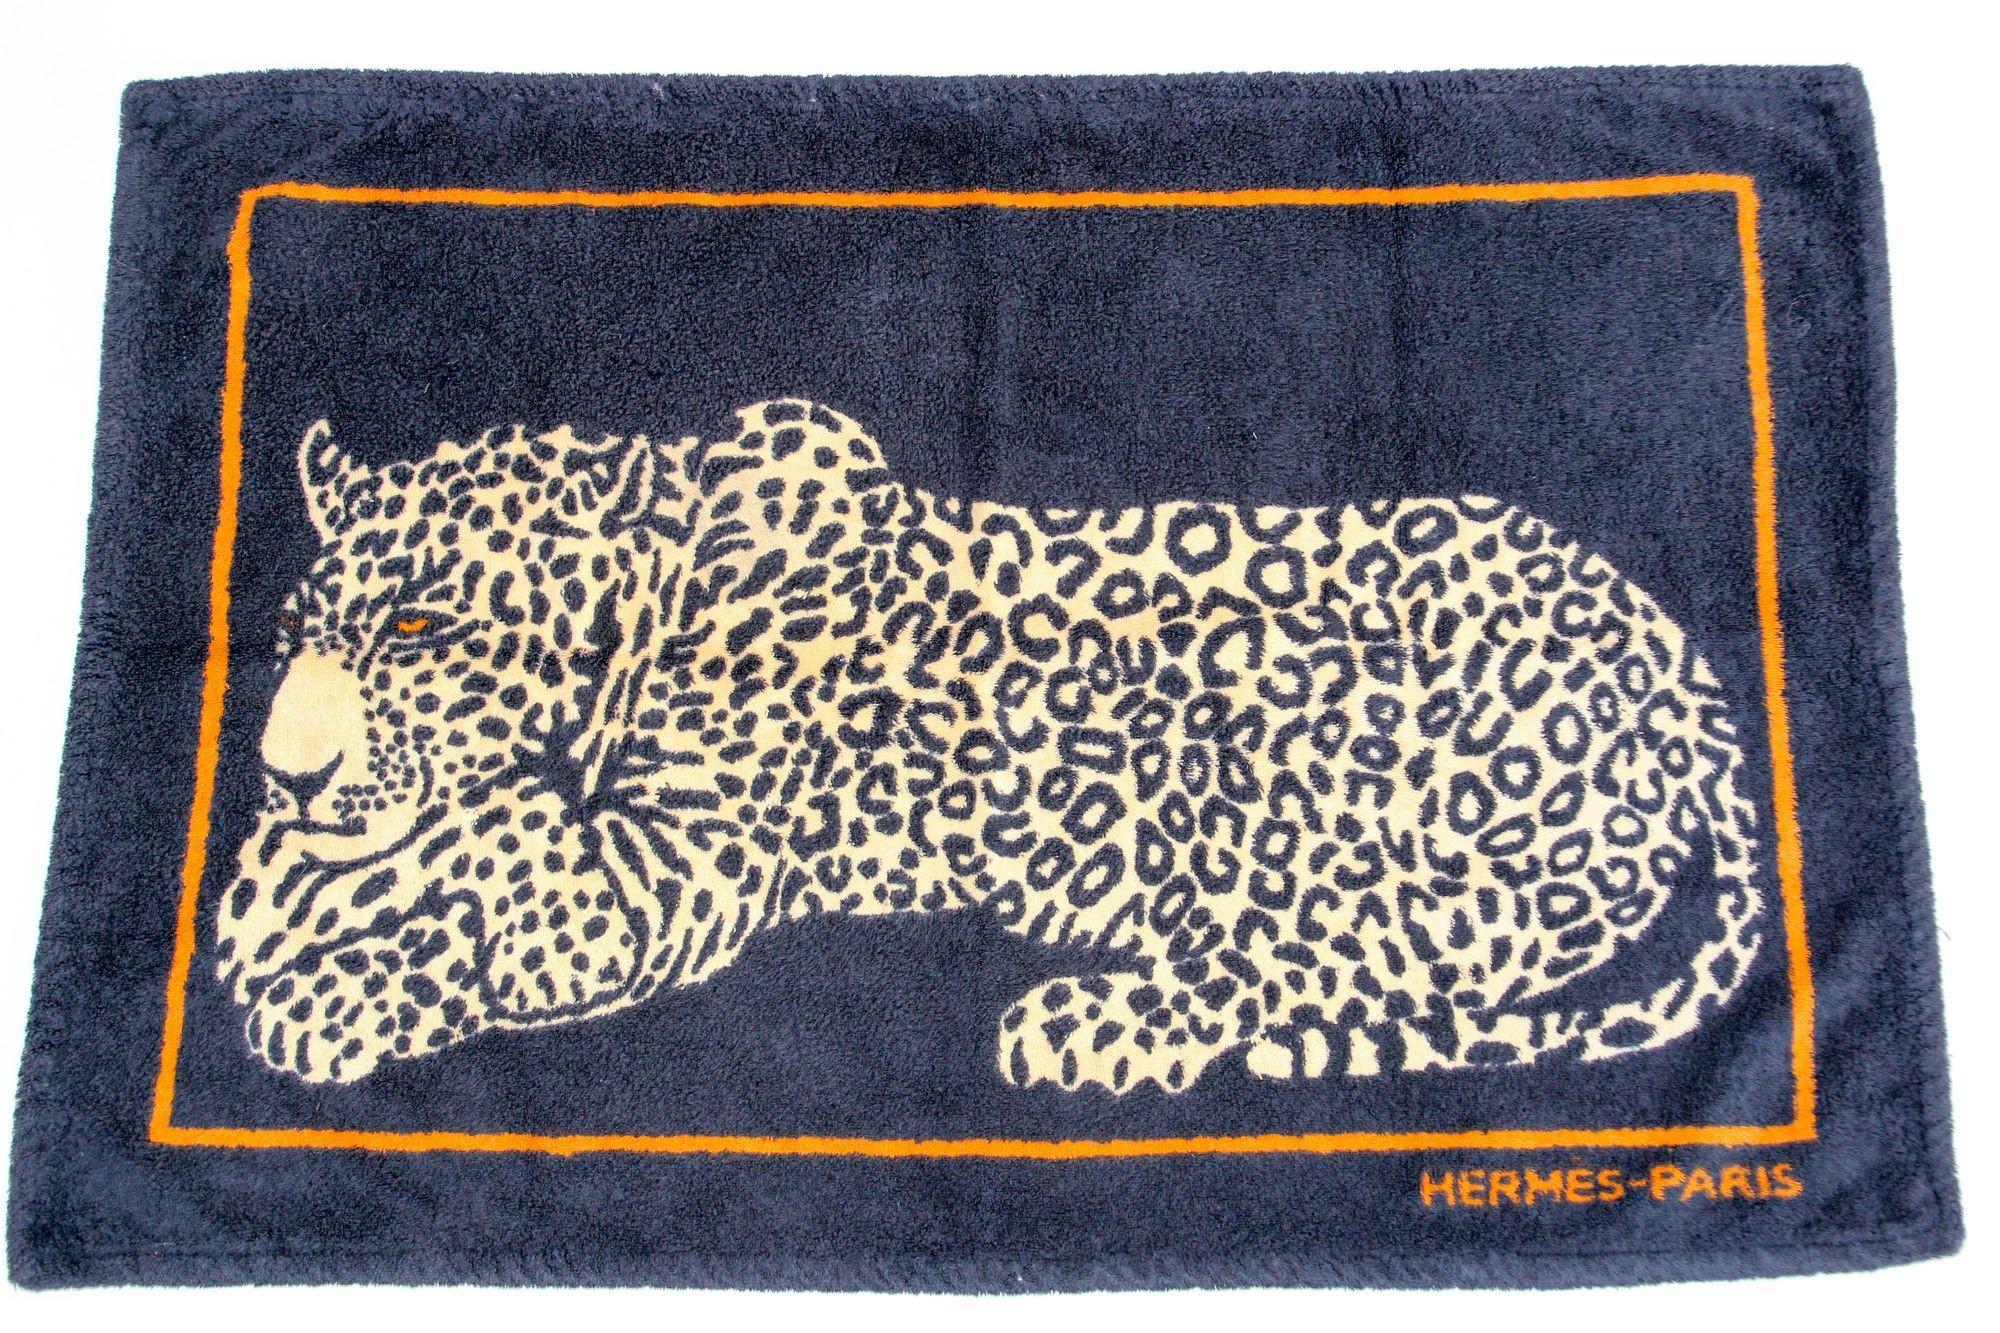 HERMES Paris small bath mat 100% Cotton Made in France.
Luxury Hermes Paris terry cloth bath rug mat.
Authentic vintage Hermès rectangular bath rug with a leopard print on black background and orange back.
The print is a leopard resting,